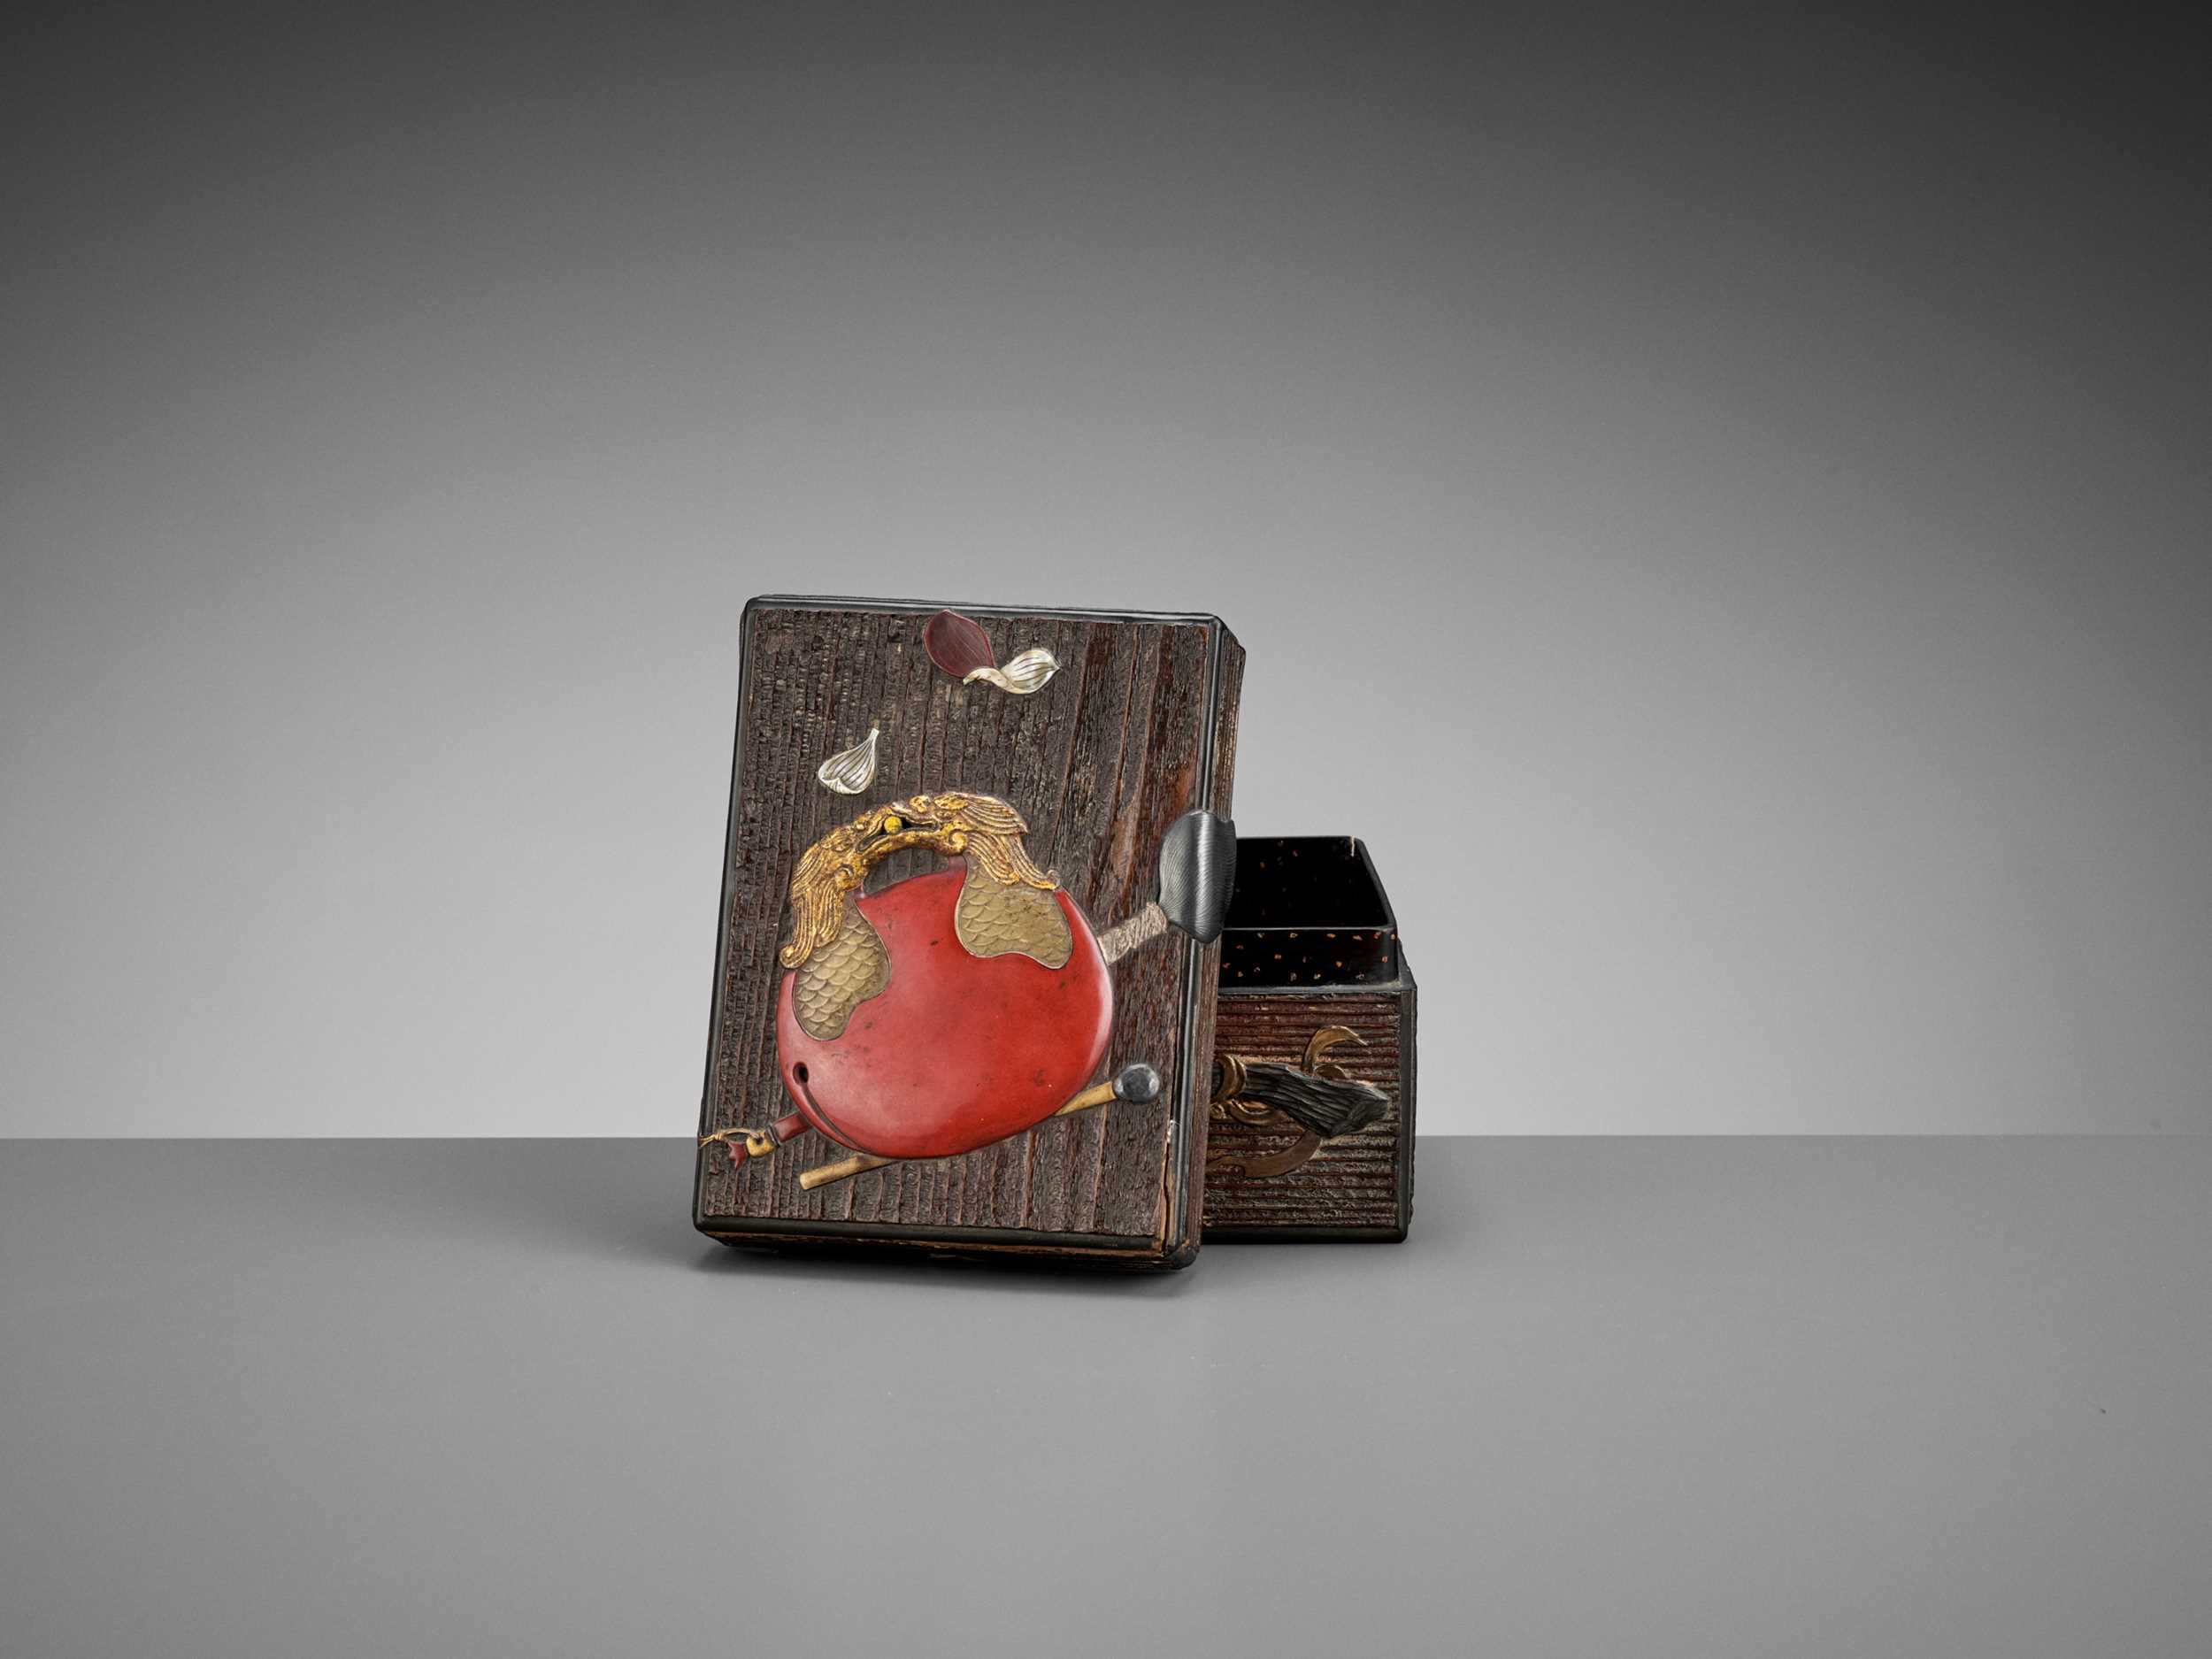 Lot 95 - OGAWA HARITSU (RITSUO): A SMALL CERAMIC AND LACQUER INLAID KIRI WOOD BOX AND COVER WITH BUDDHIST OBJECTS